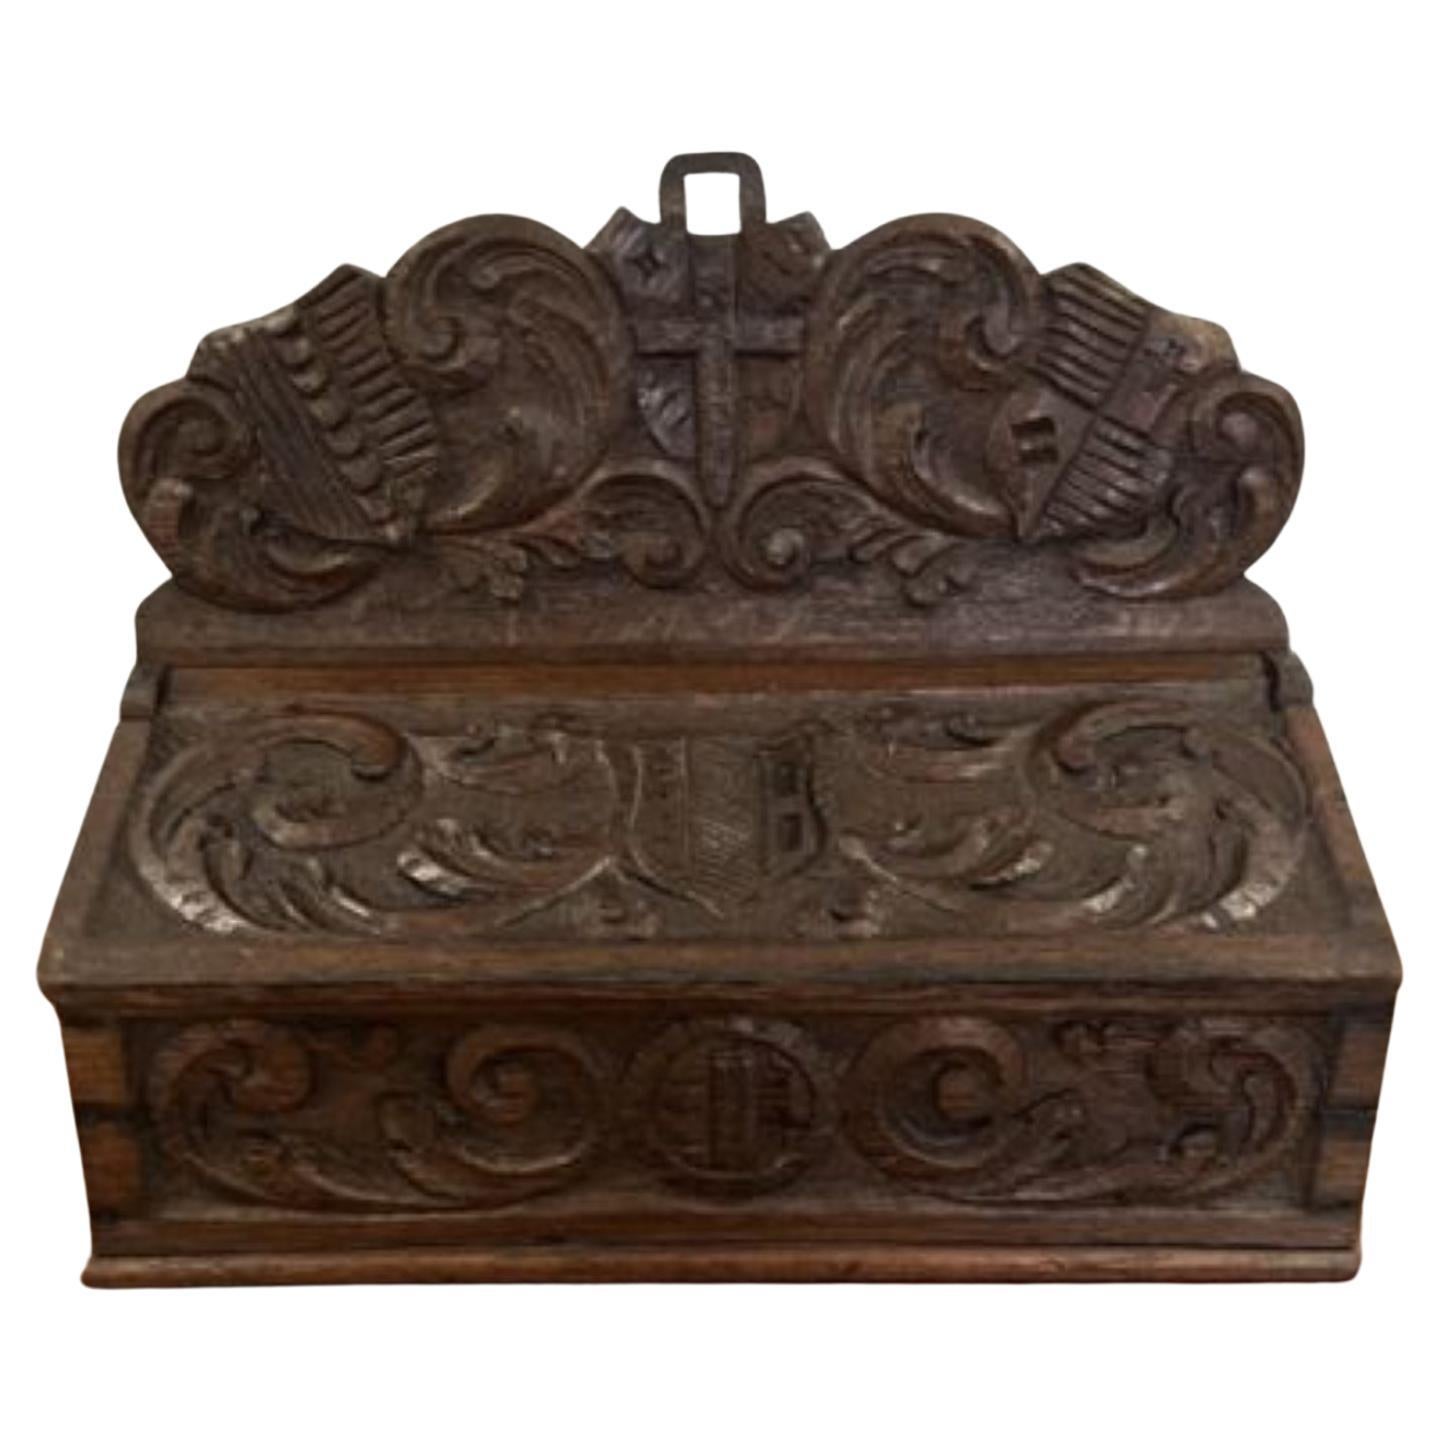 Quality antique Victorian carved oak candle box For Sale